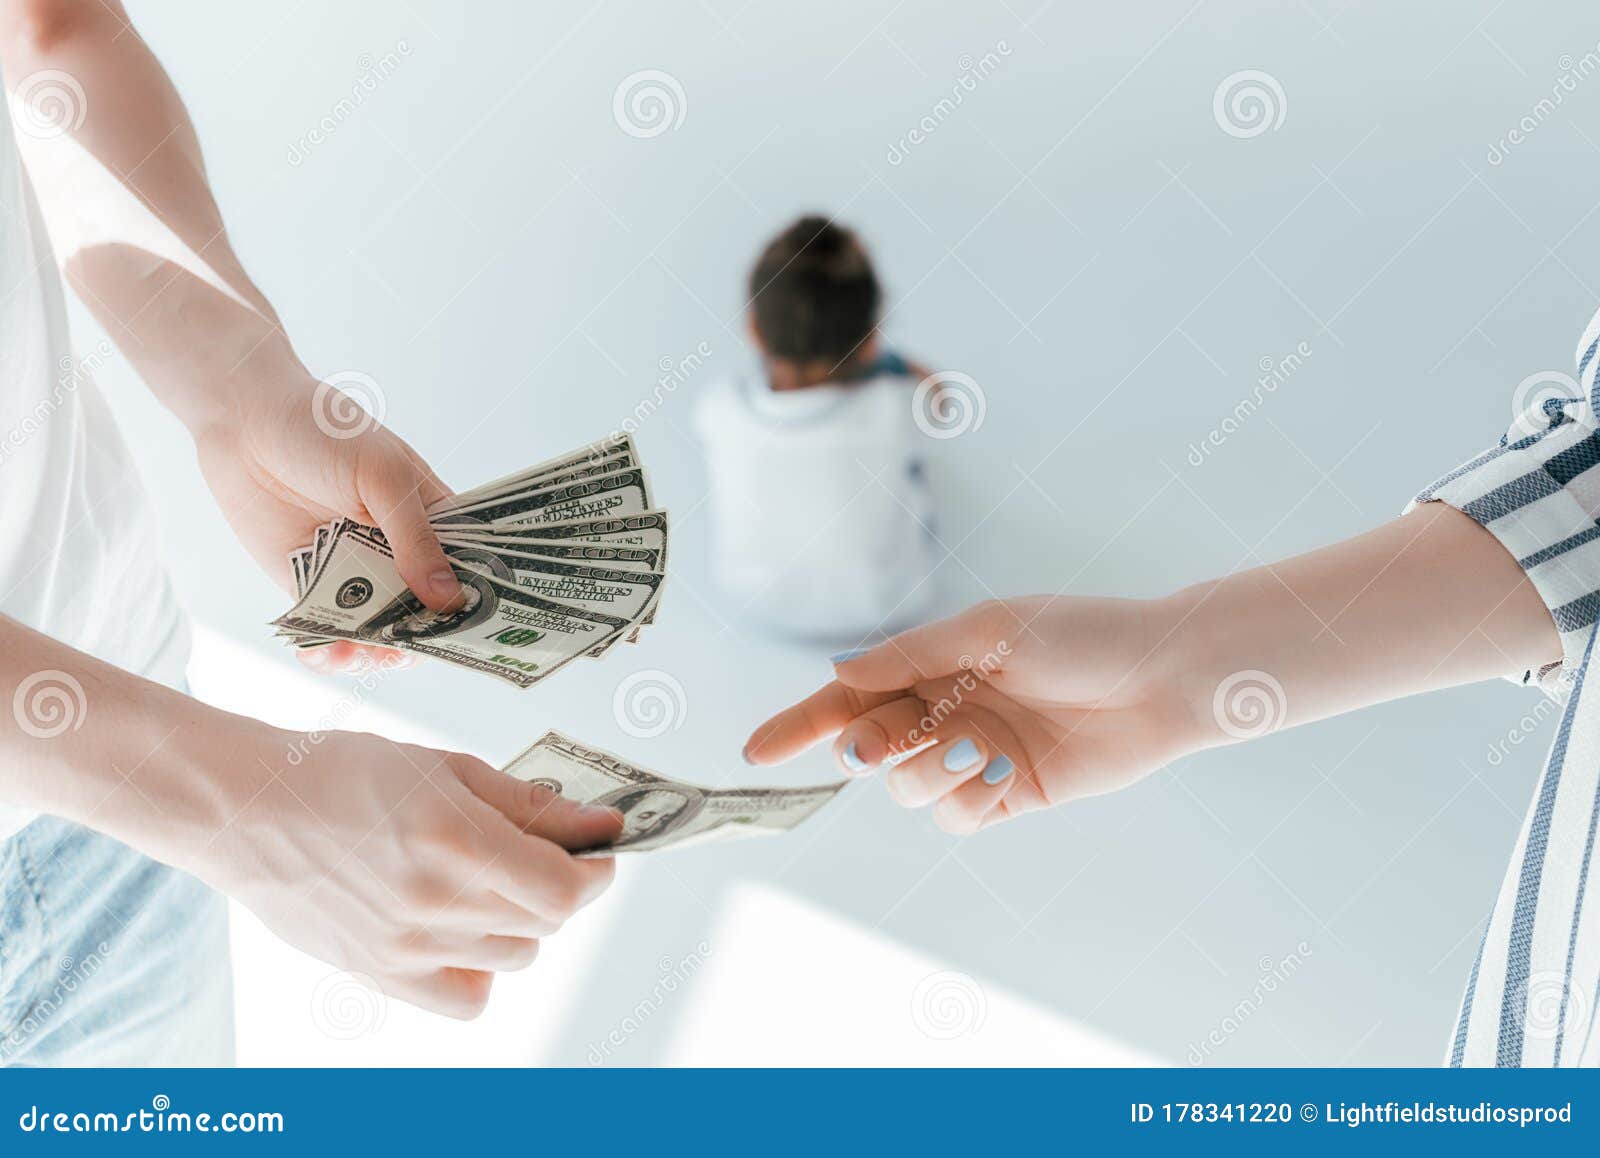 Parents Giving Money Photos - Free & Royalty-Free Stock Photos from  Dreamstime